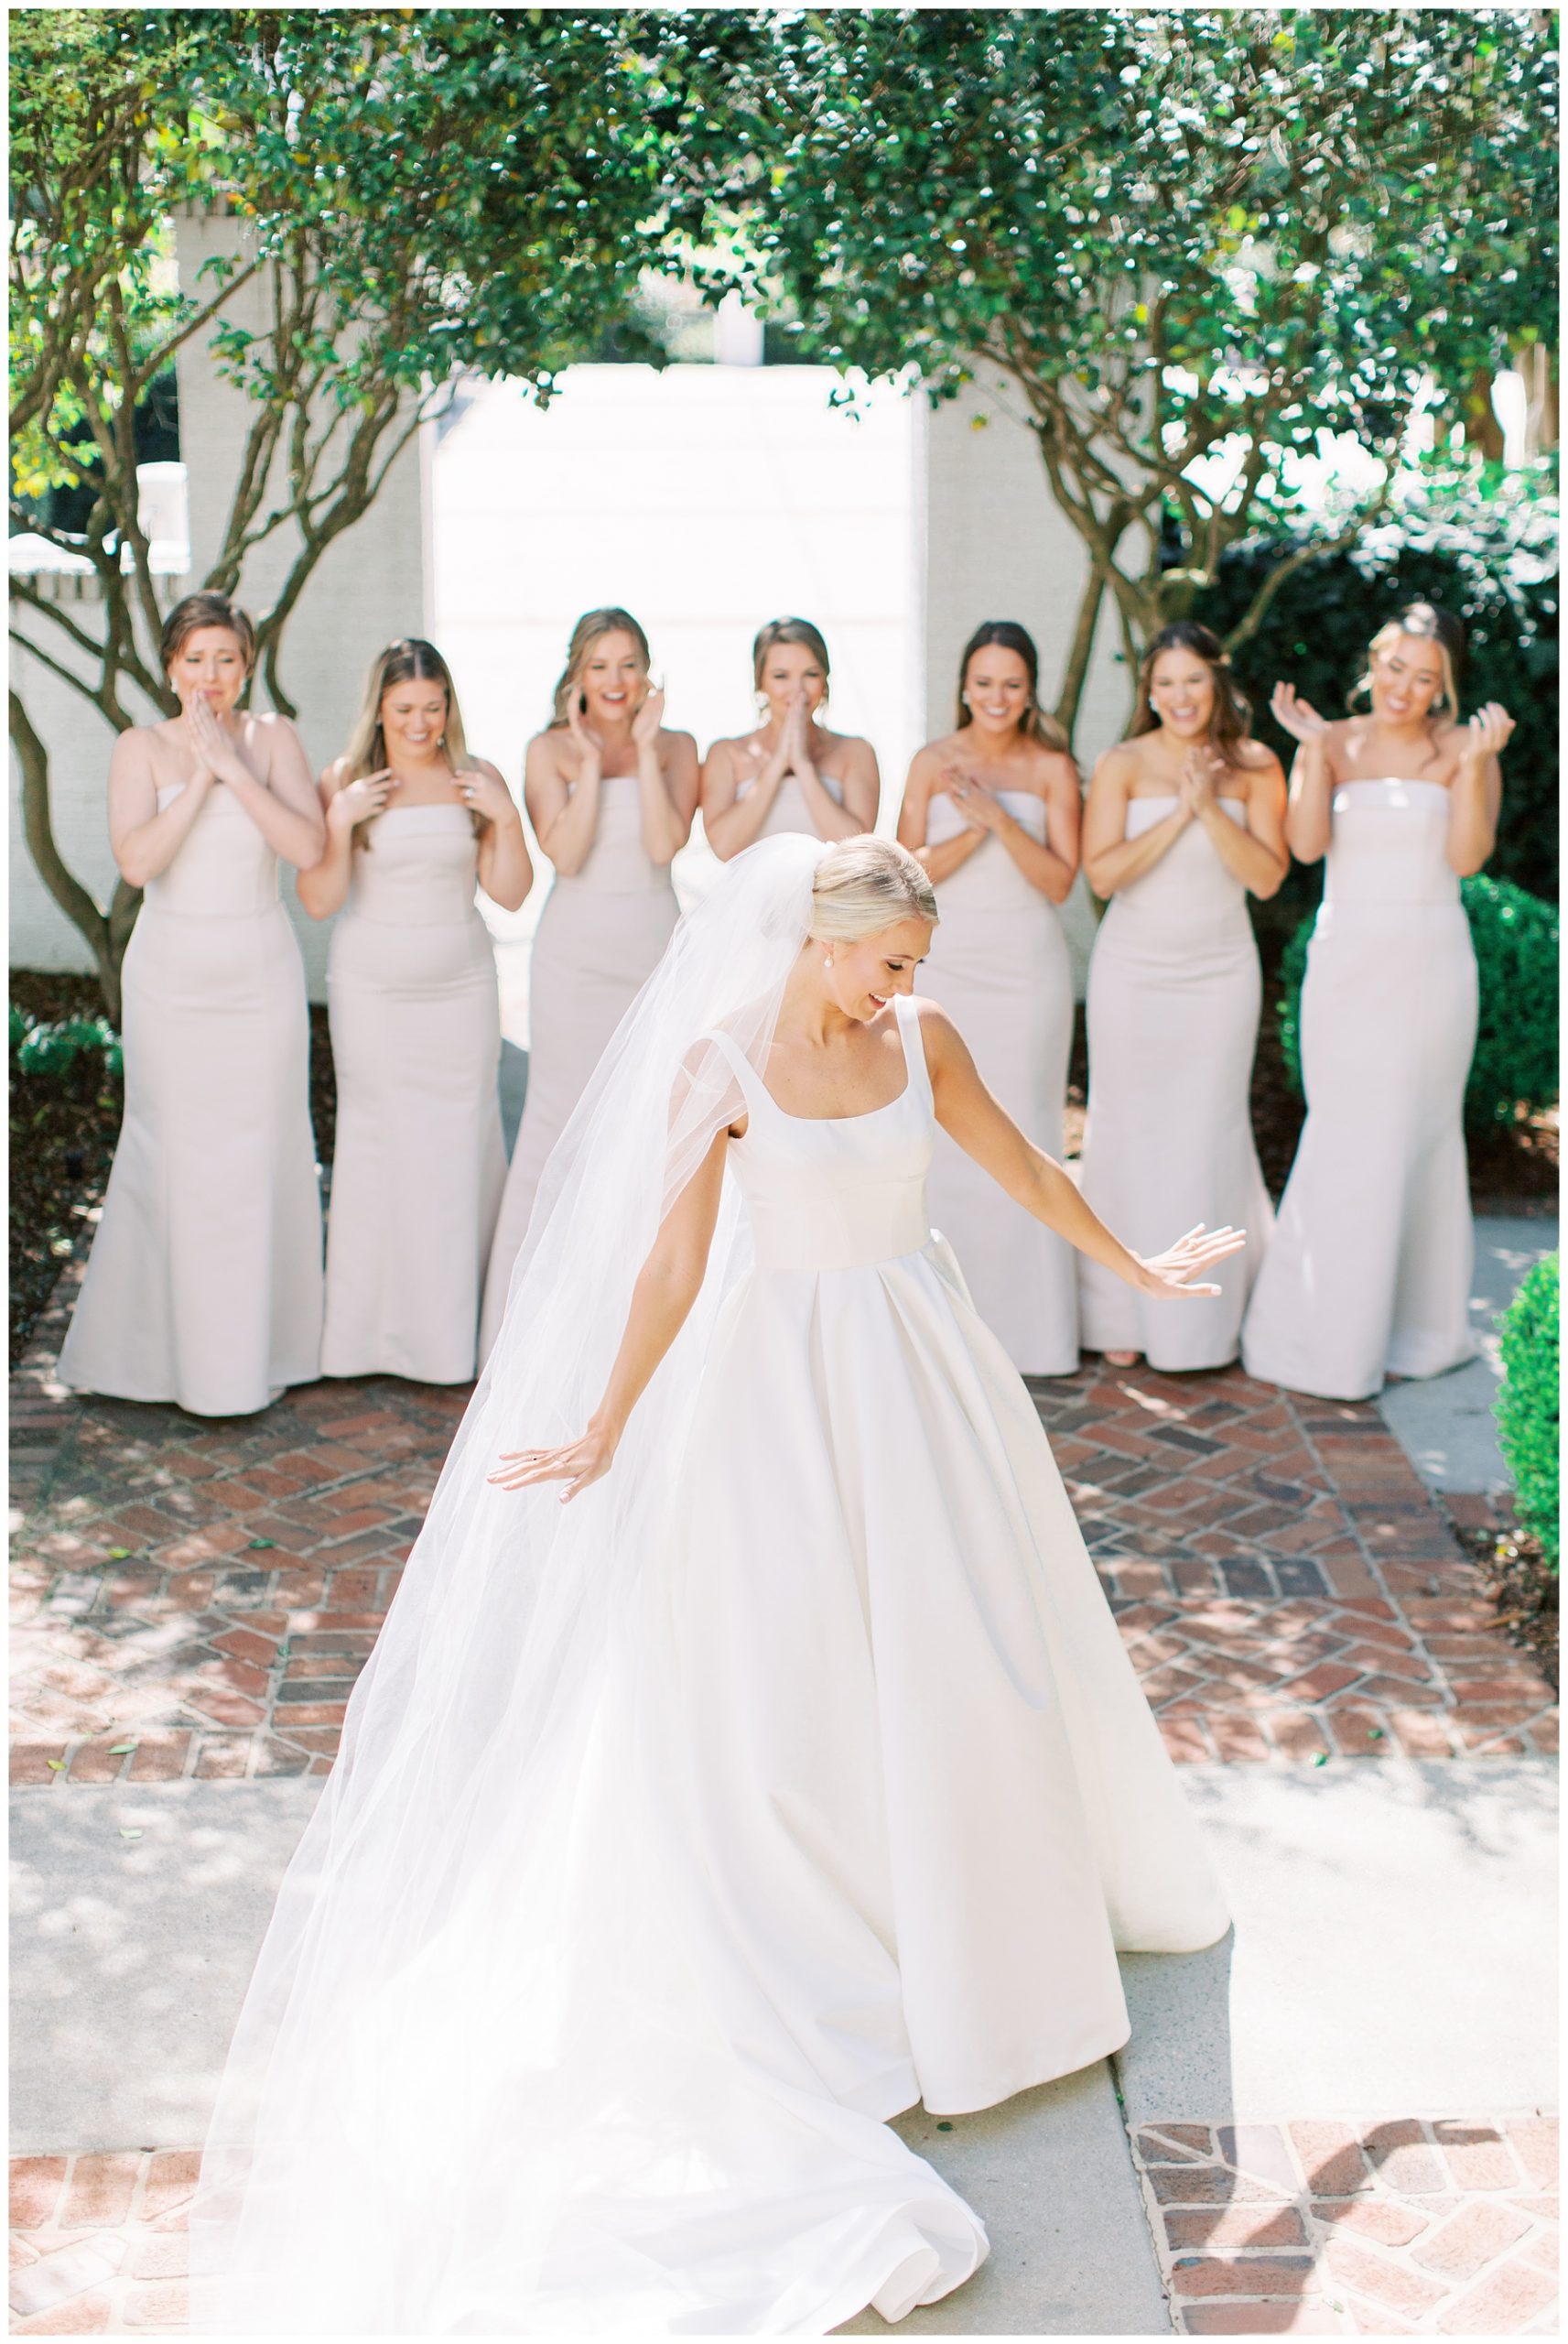 bride shows off wedding gown and veil to bridesmaids during first look